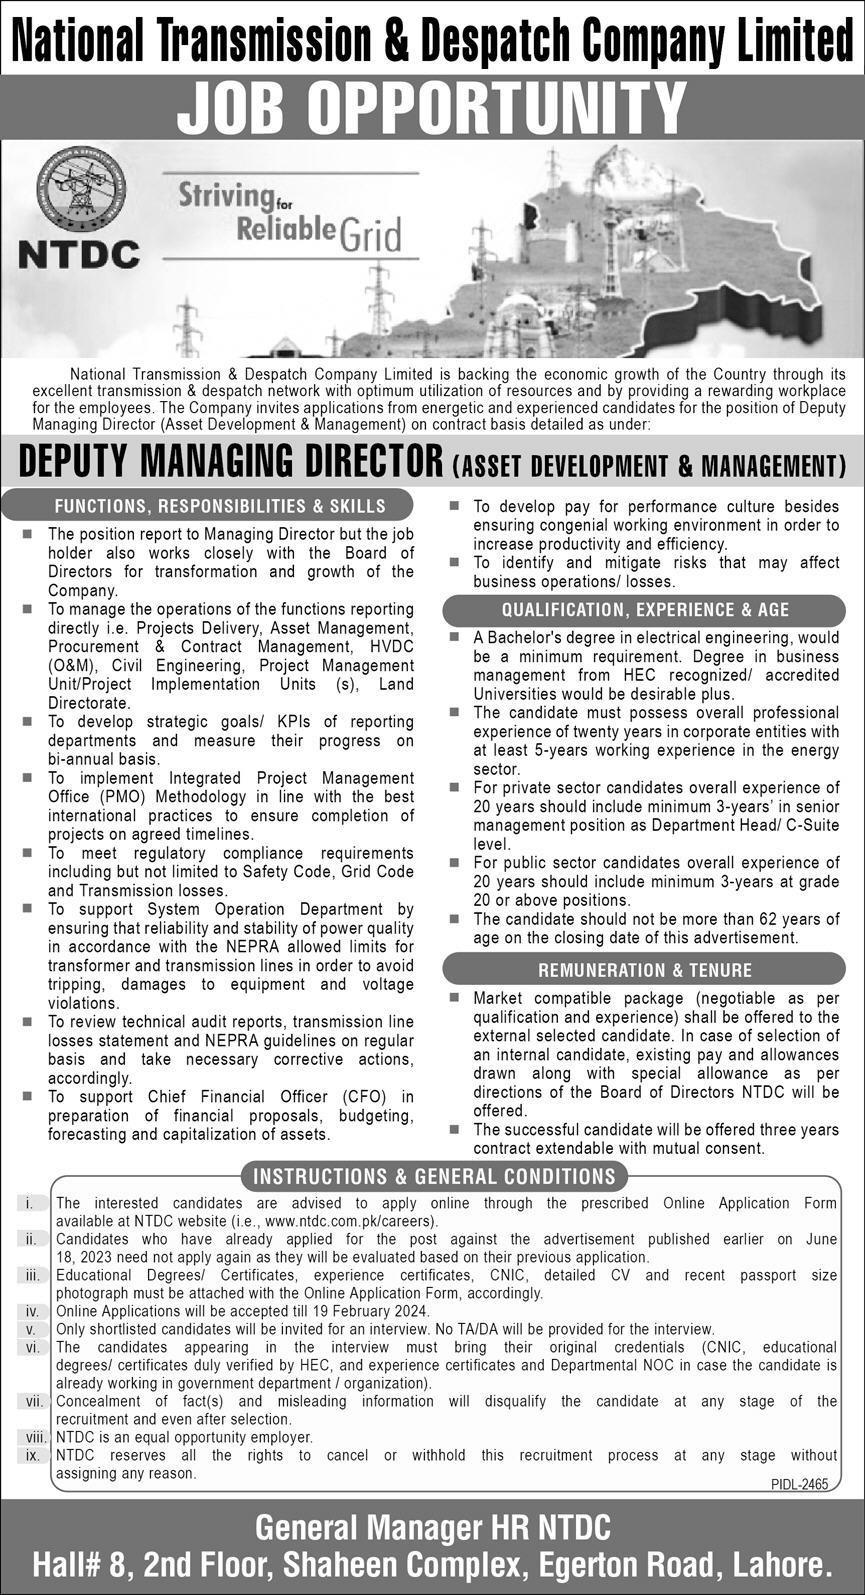 NTDC National Transmission & Dispatch Company Limited Job Opportunity 2024